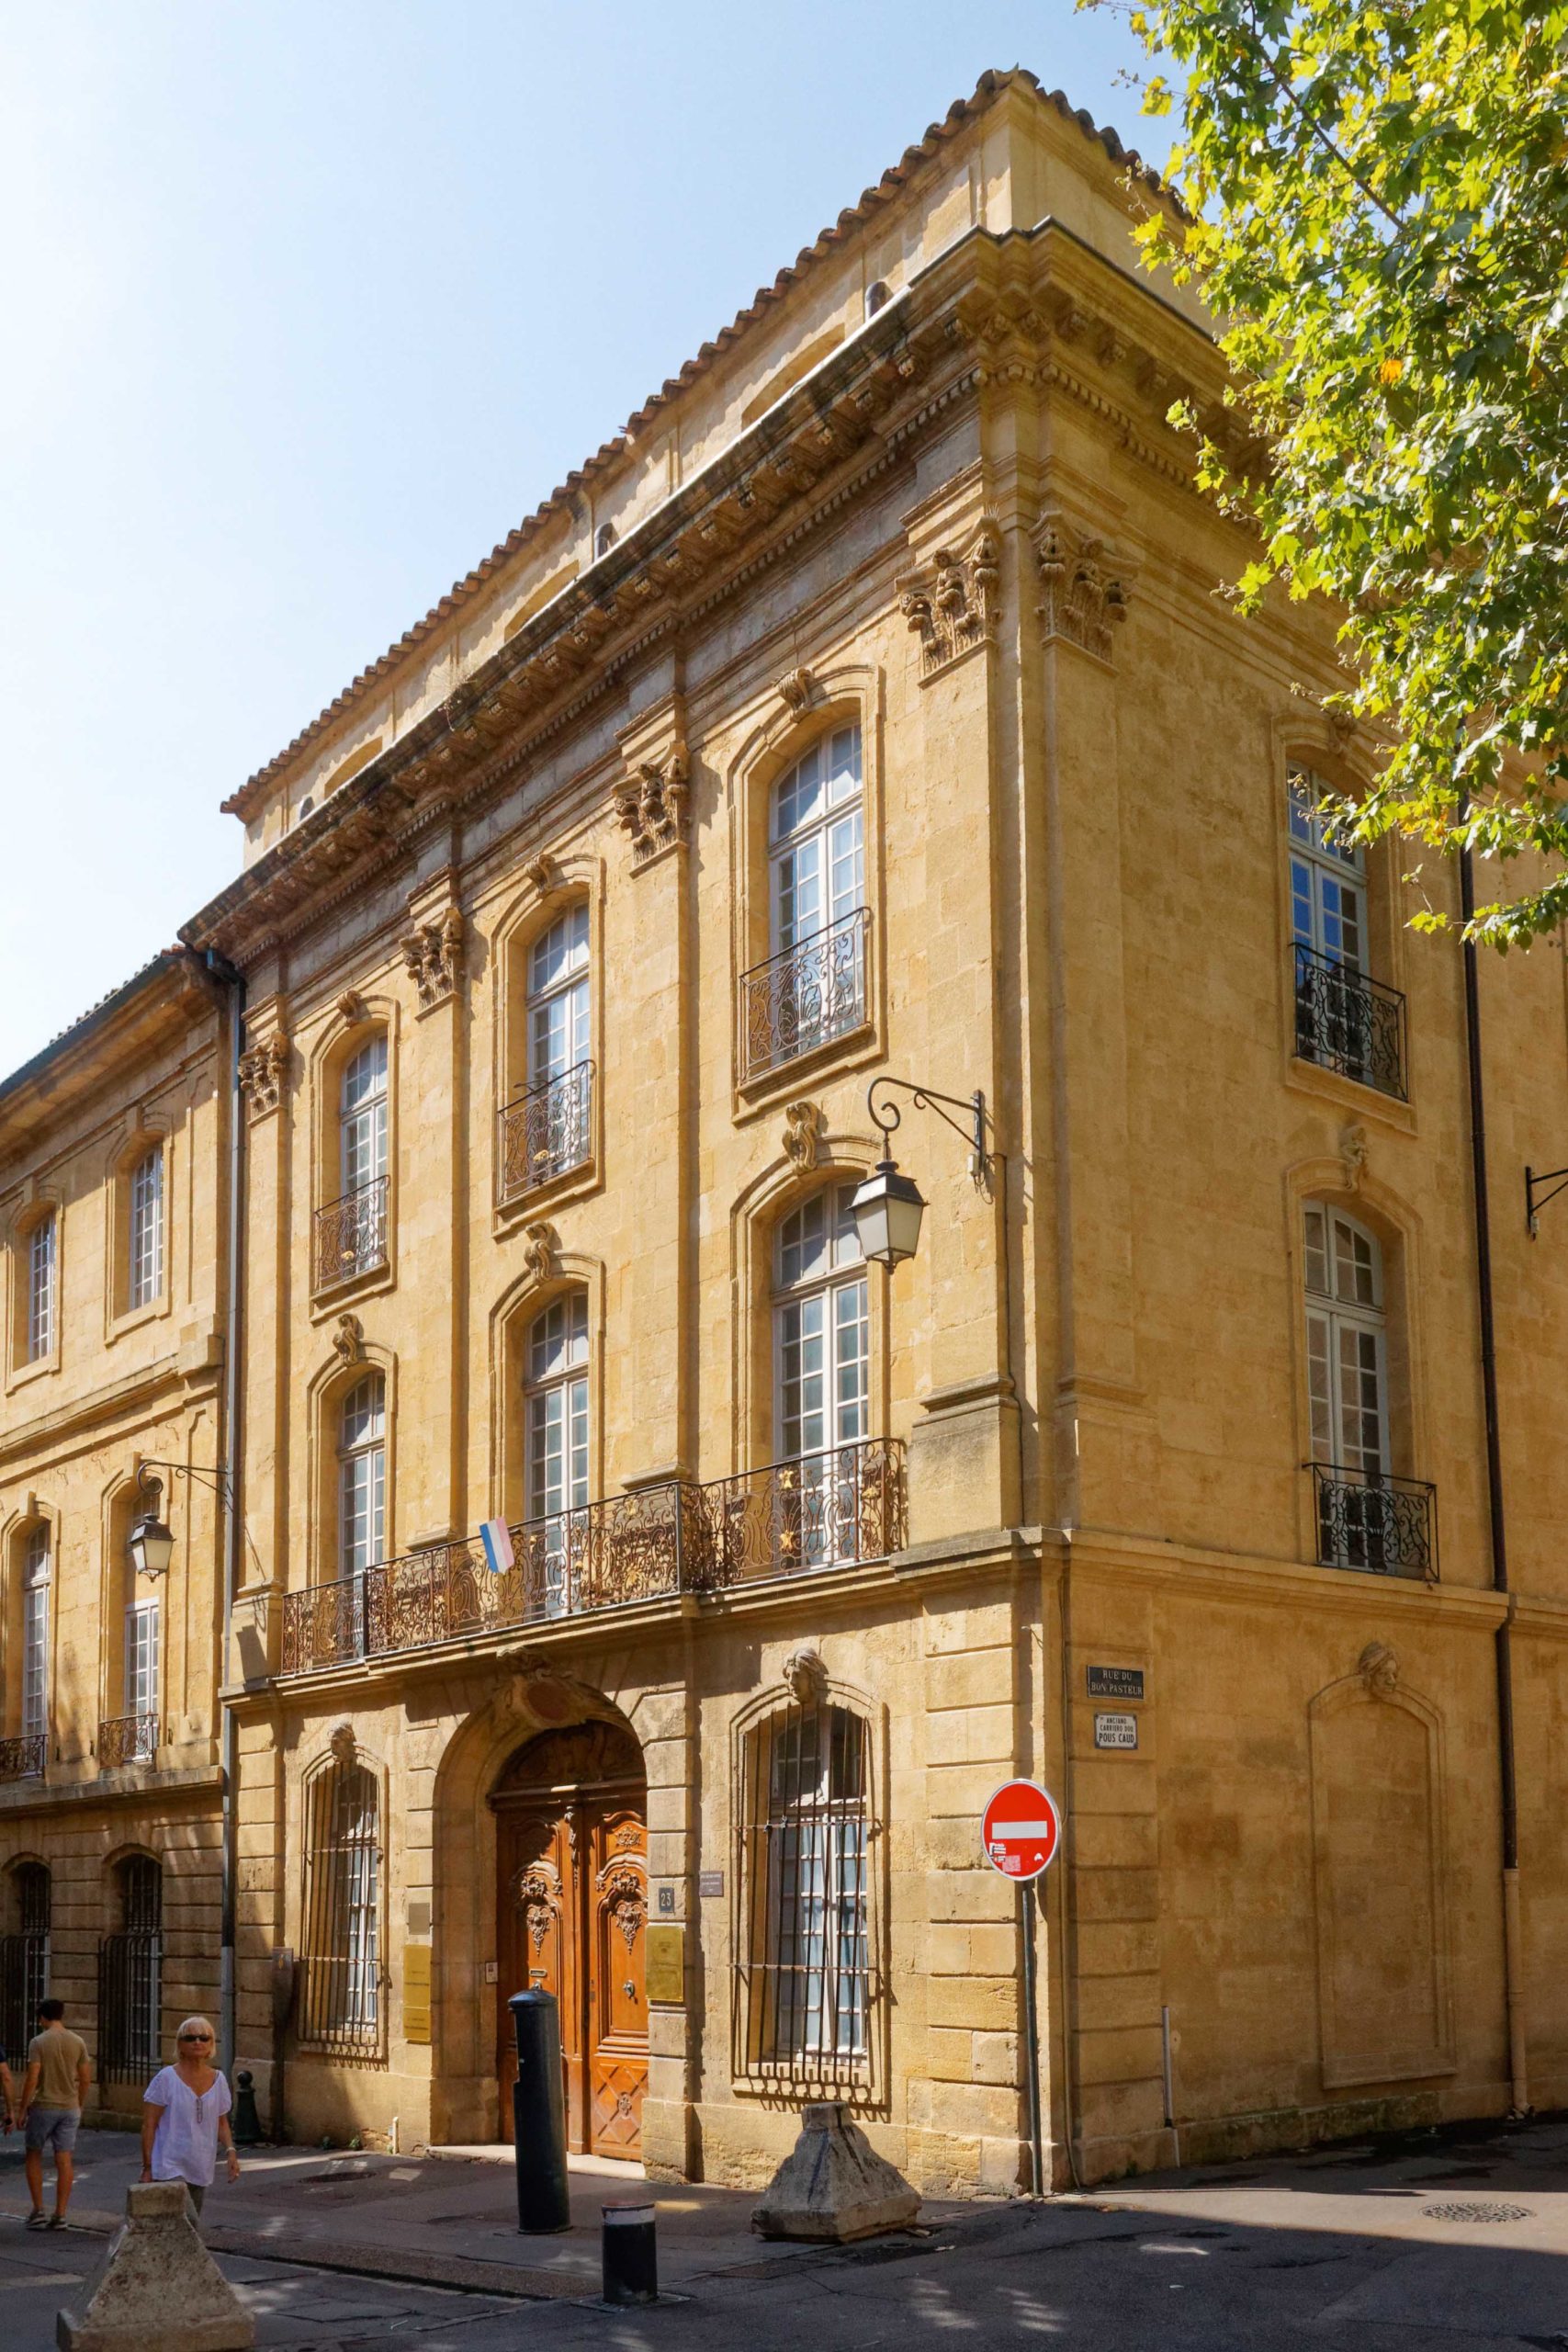 Aix-en-Provence old town - Hôtel Maynier d'Oppède © Bjs - licence [CC BY-SA 4.0] from Wikimedia Commons